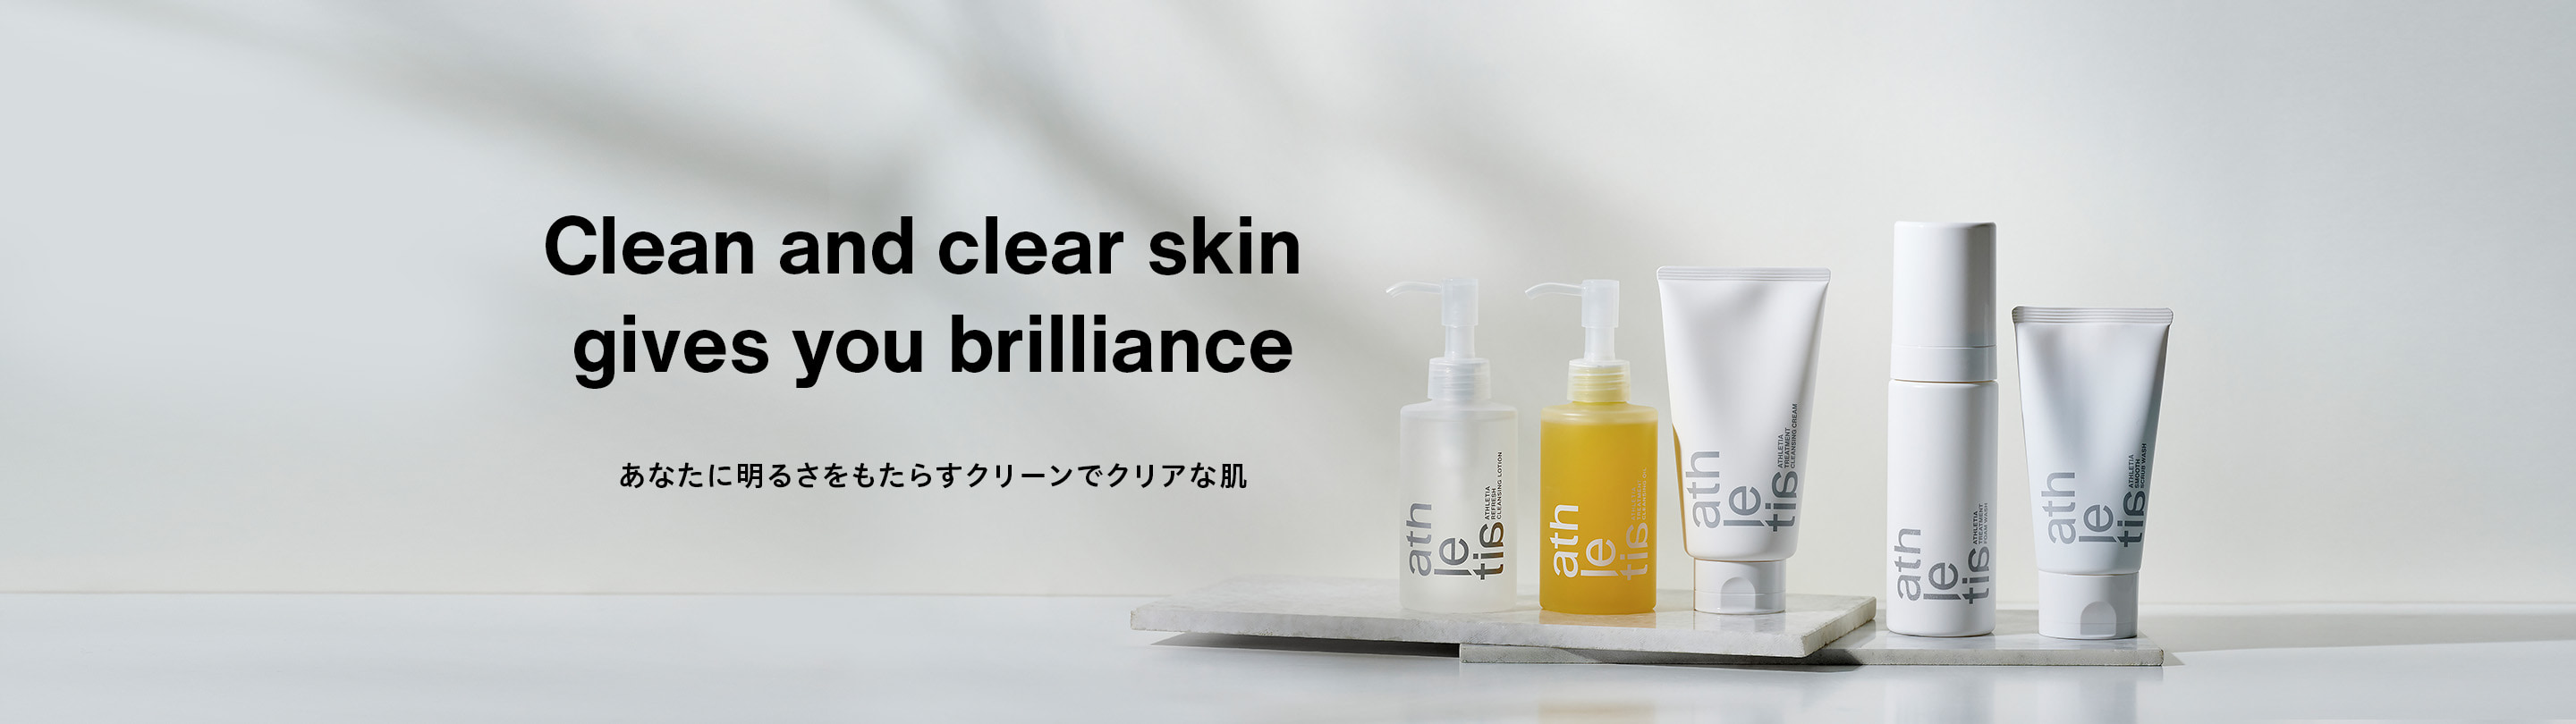 Clean and clear skin gives you brilliance あなたに明るさをもたらすクリーンでクリアな肌